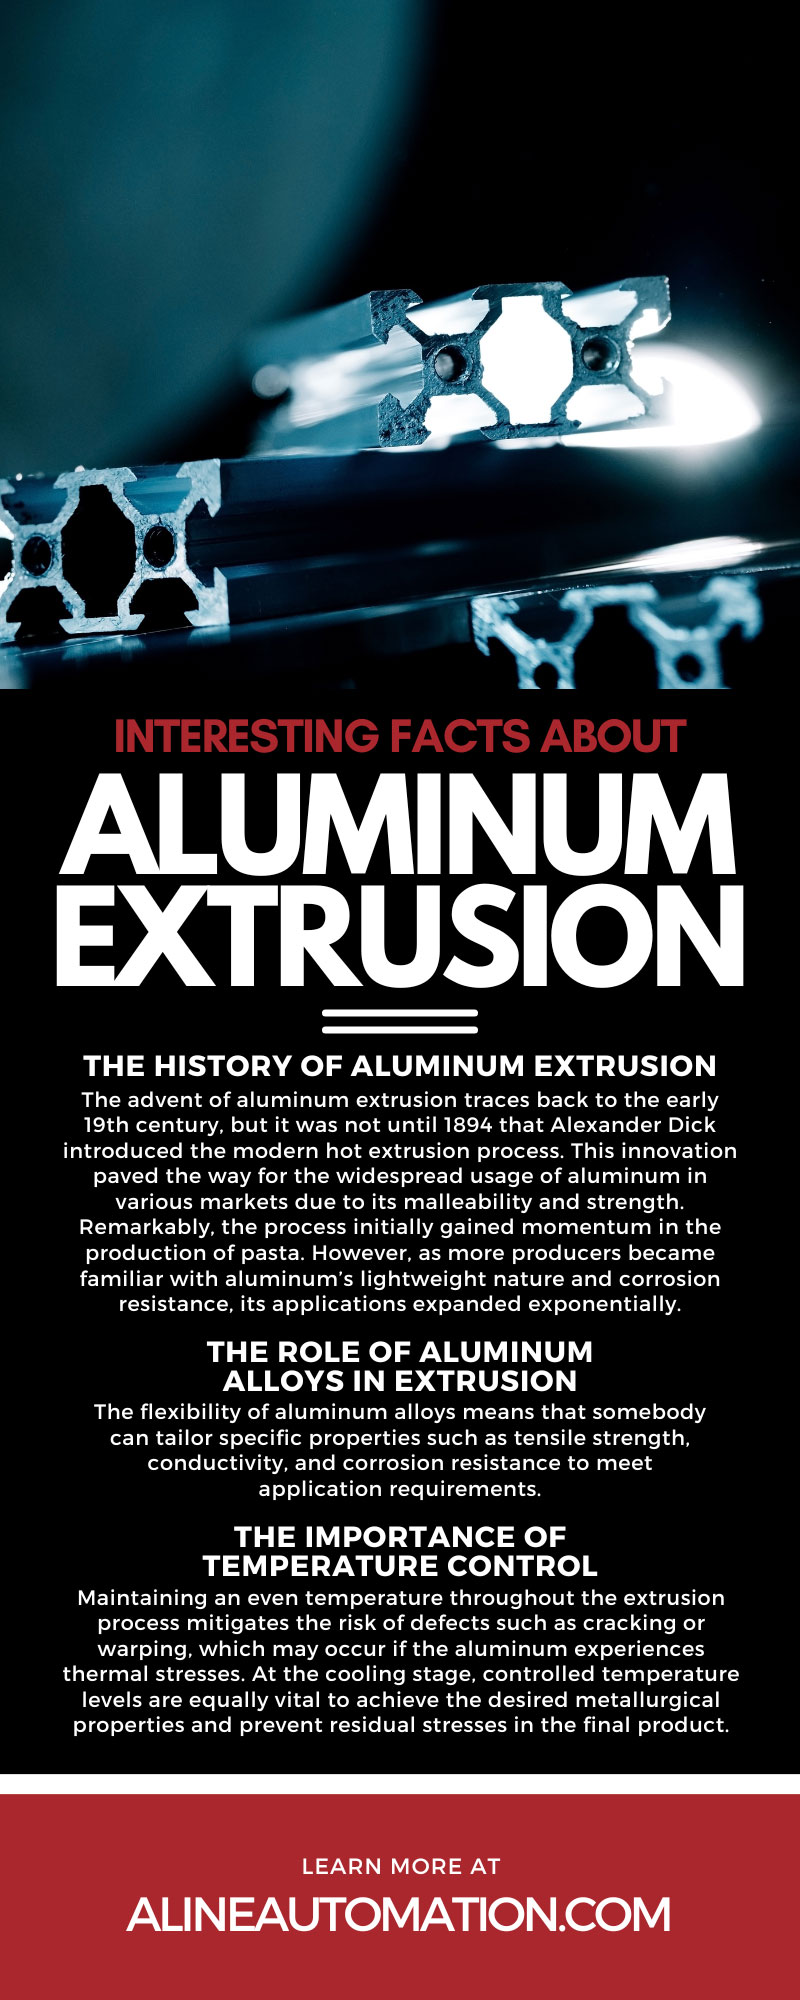 9 Interesting Facts About Aluminum Extrusion